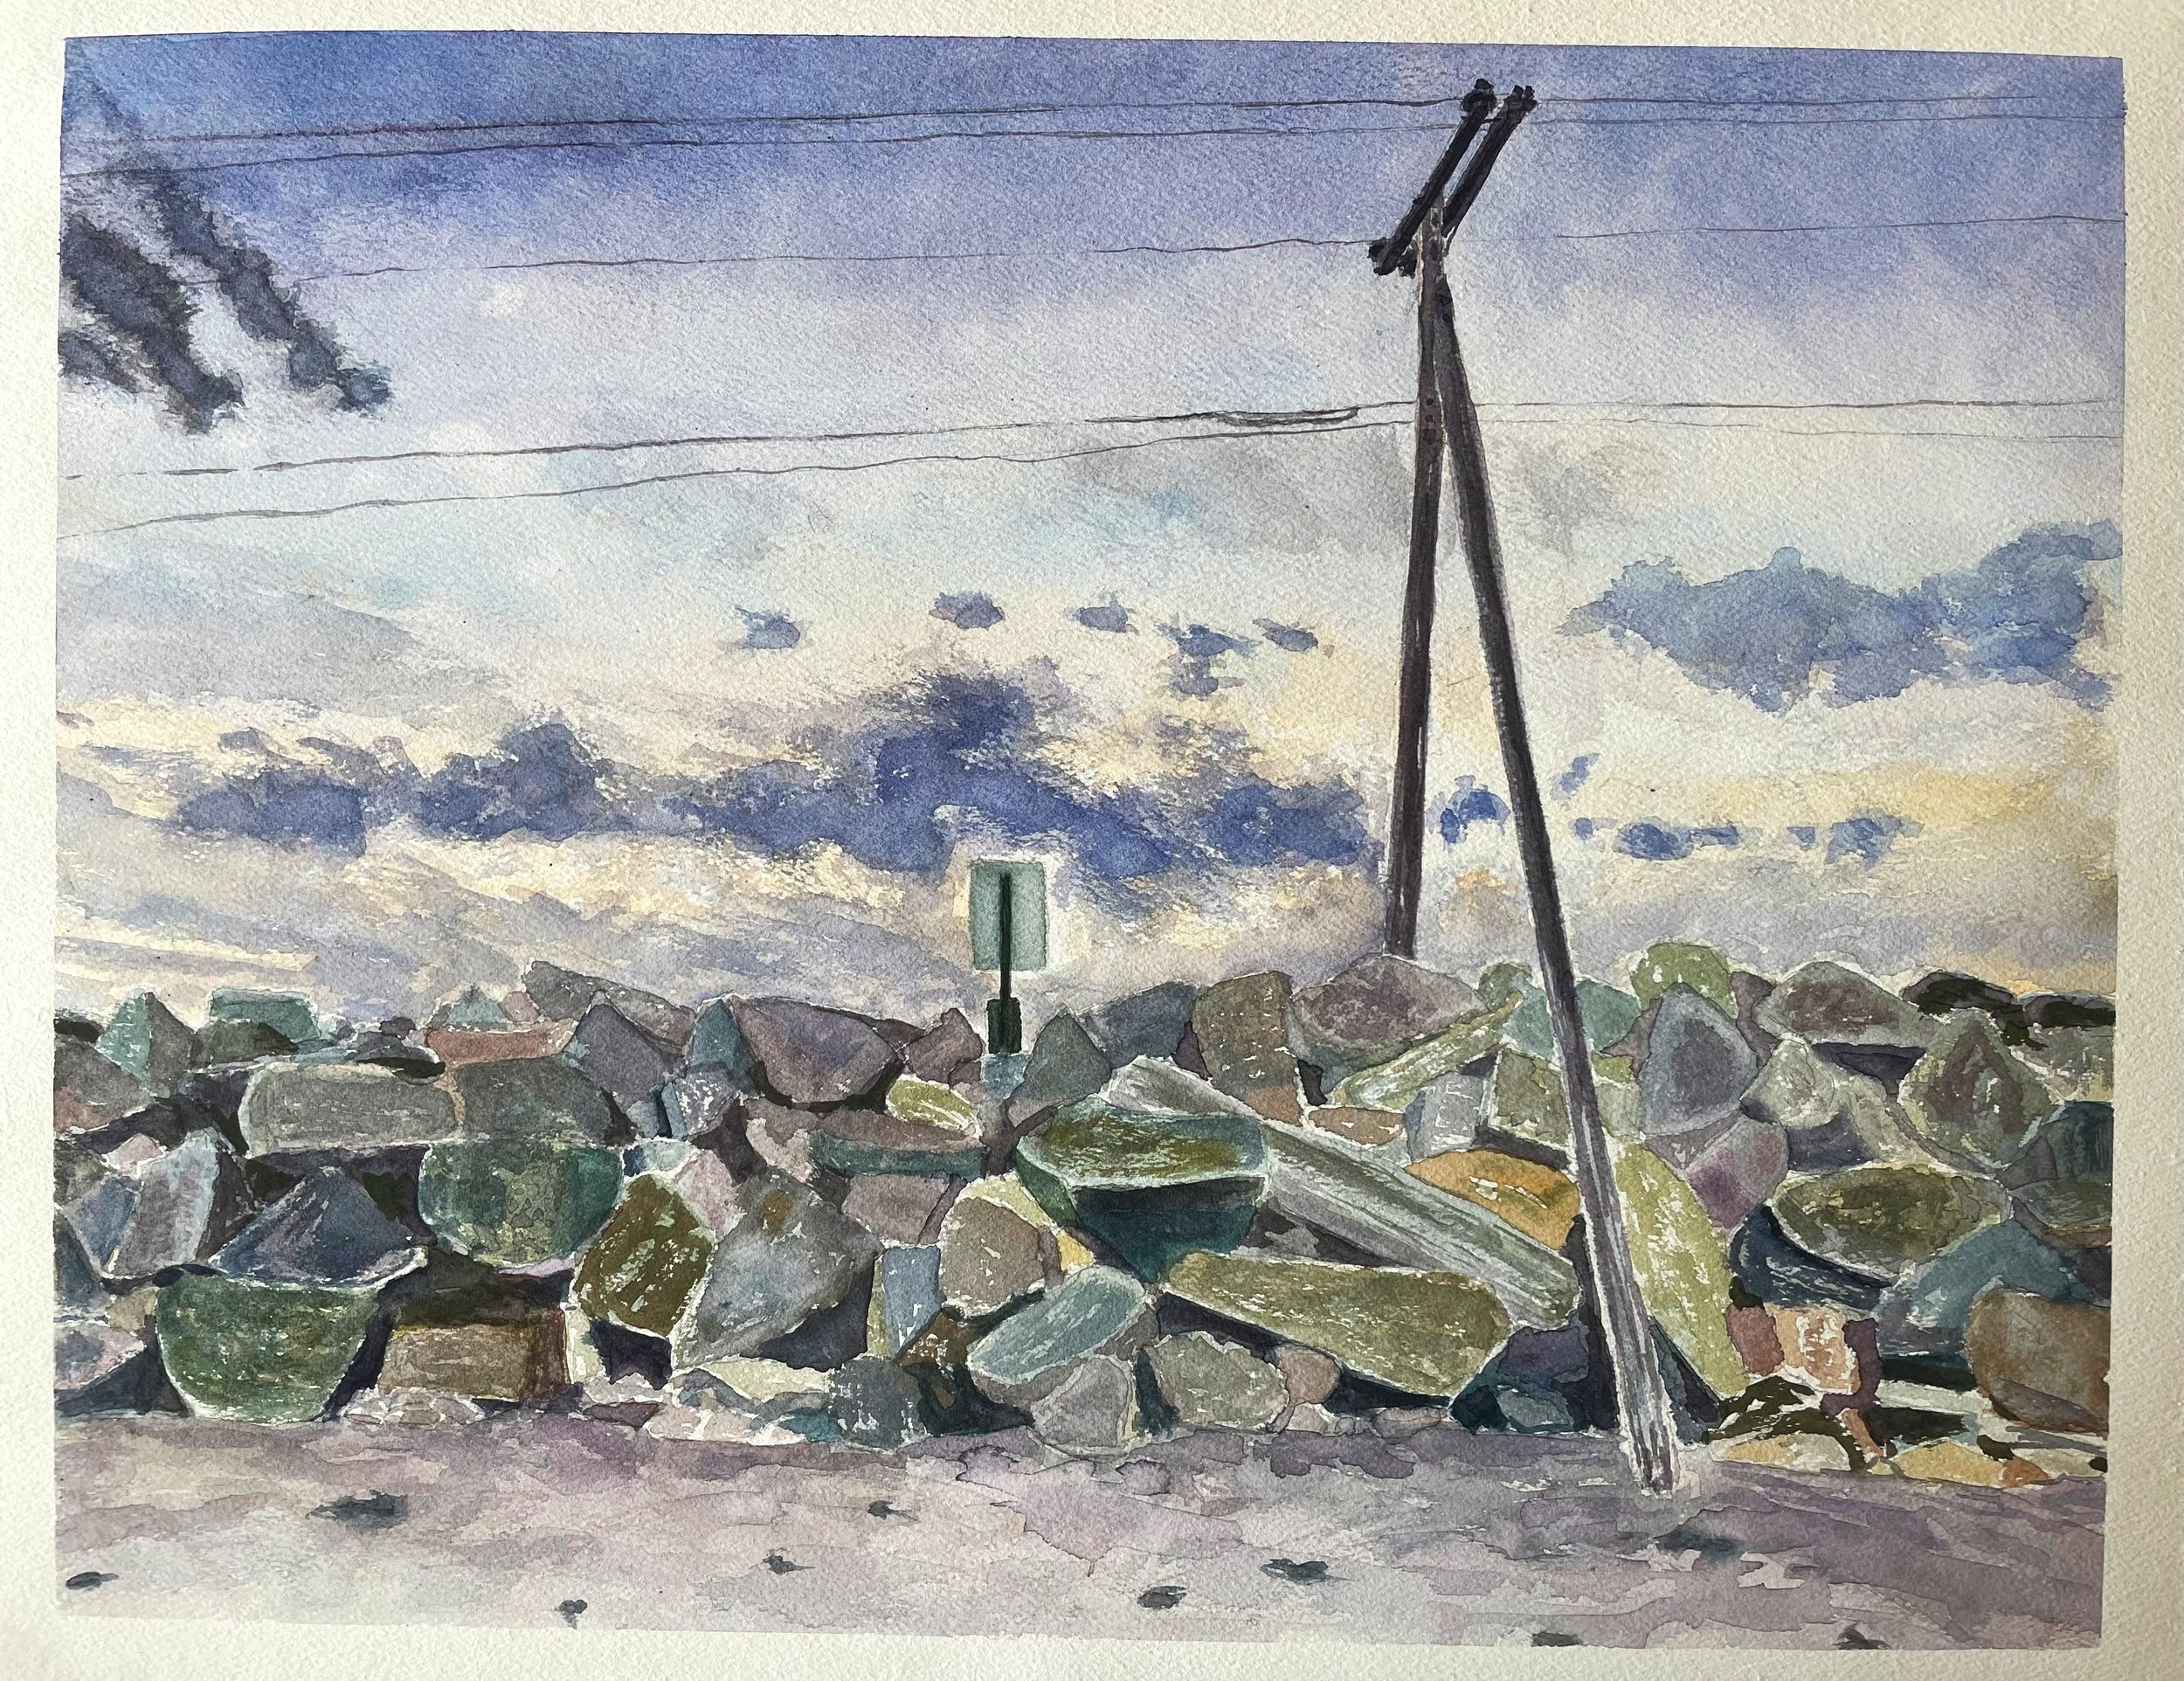   Rock Wall and Power Lines at Dusk   19” x 24”   watercolor on coldpress  2023 